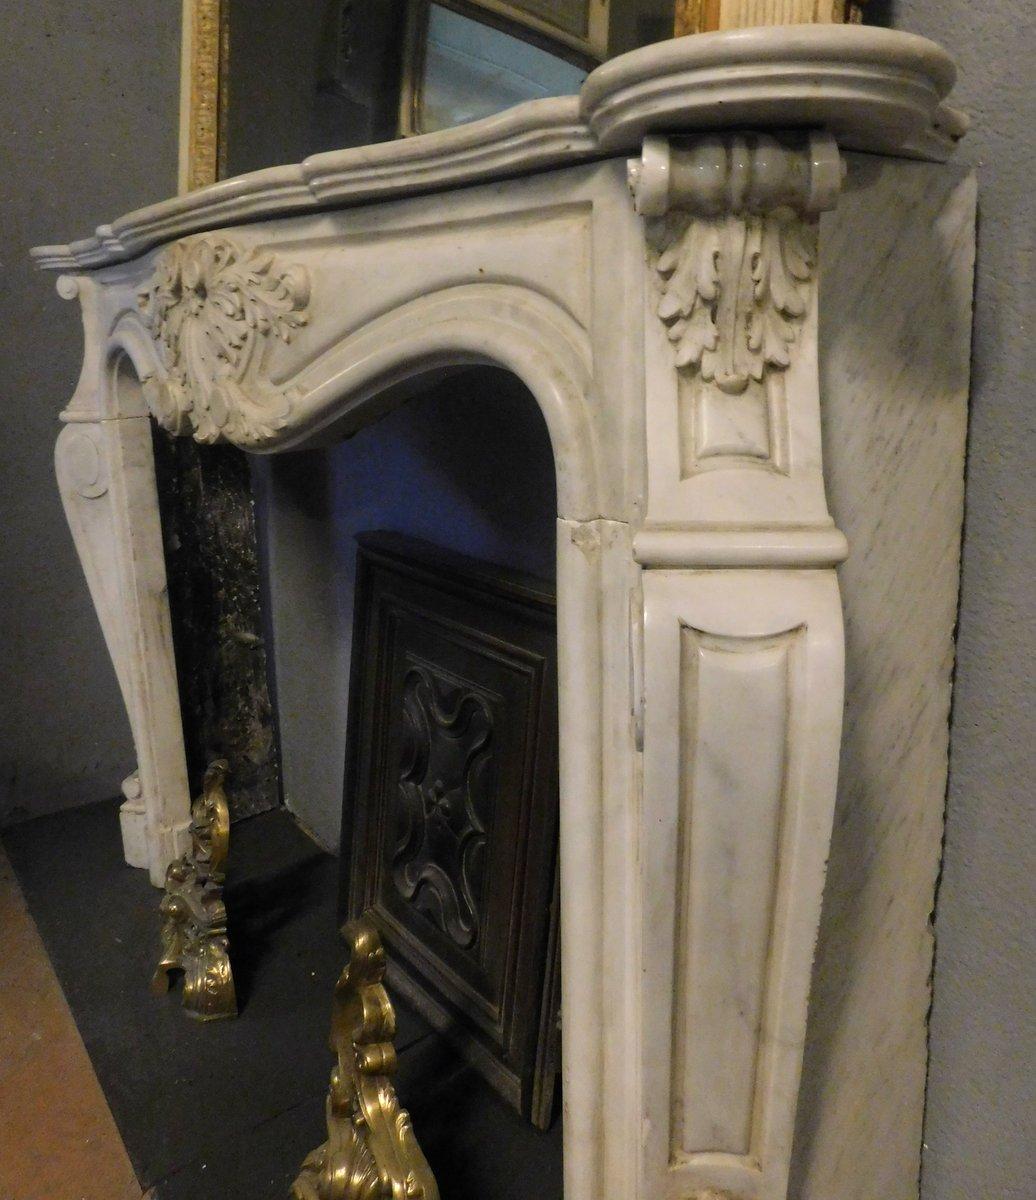 French Antique White Marble Fireplace, Richly Carved, Wavy Legs, 18th Century, France